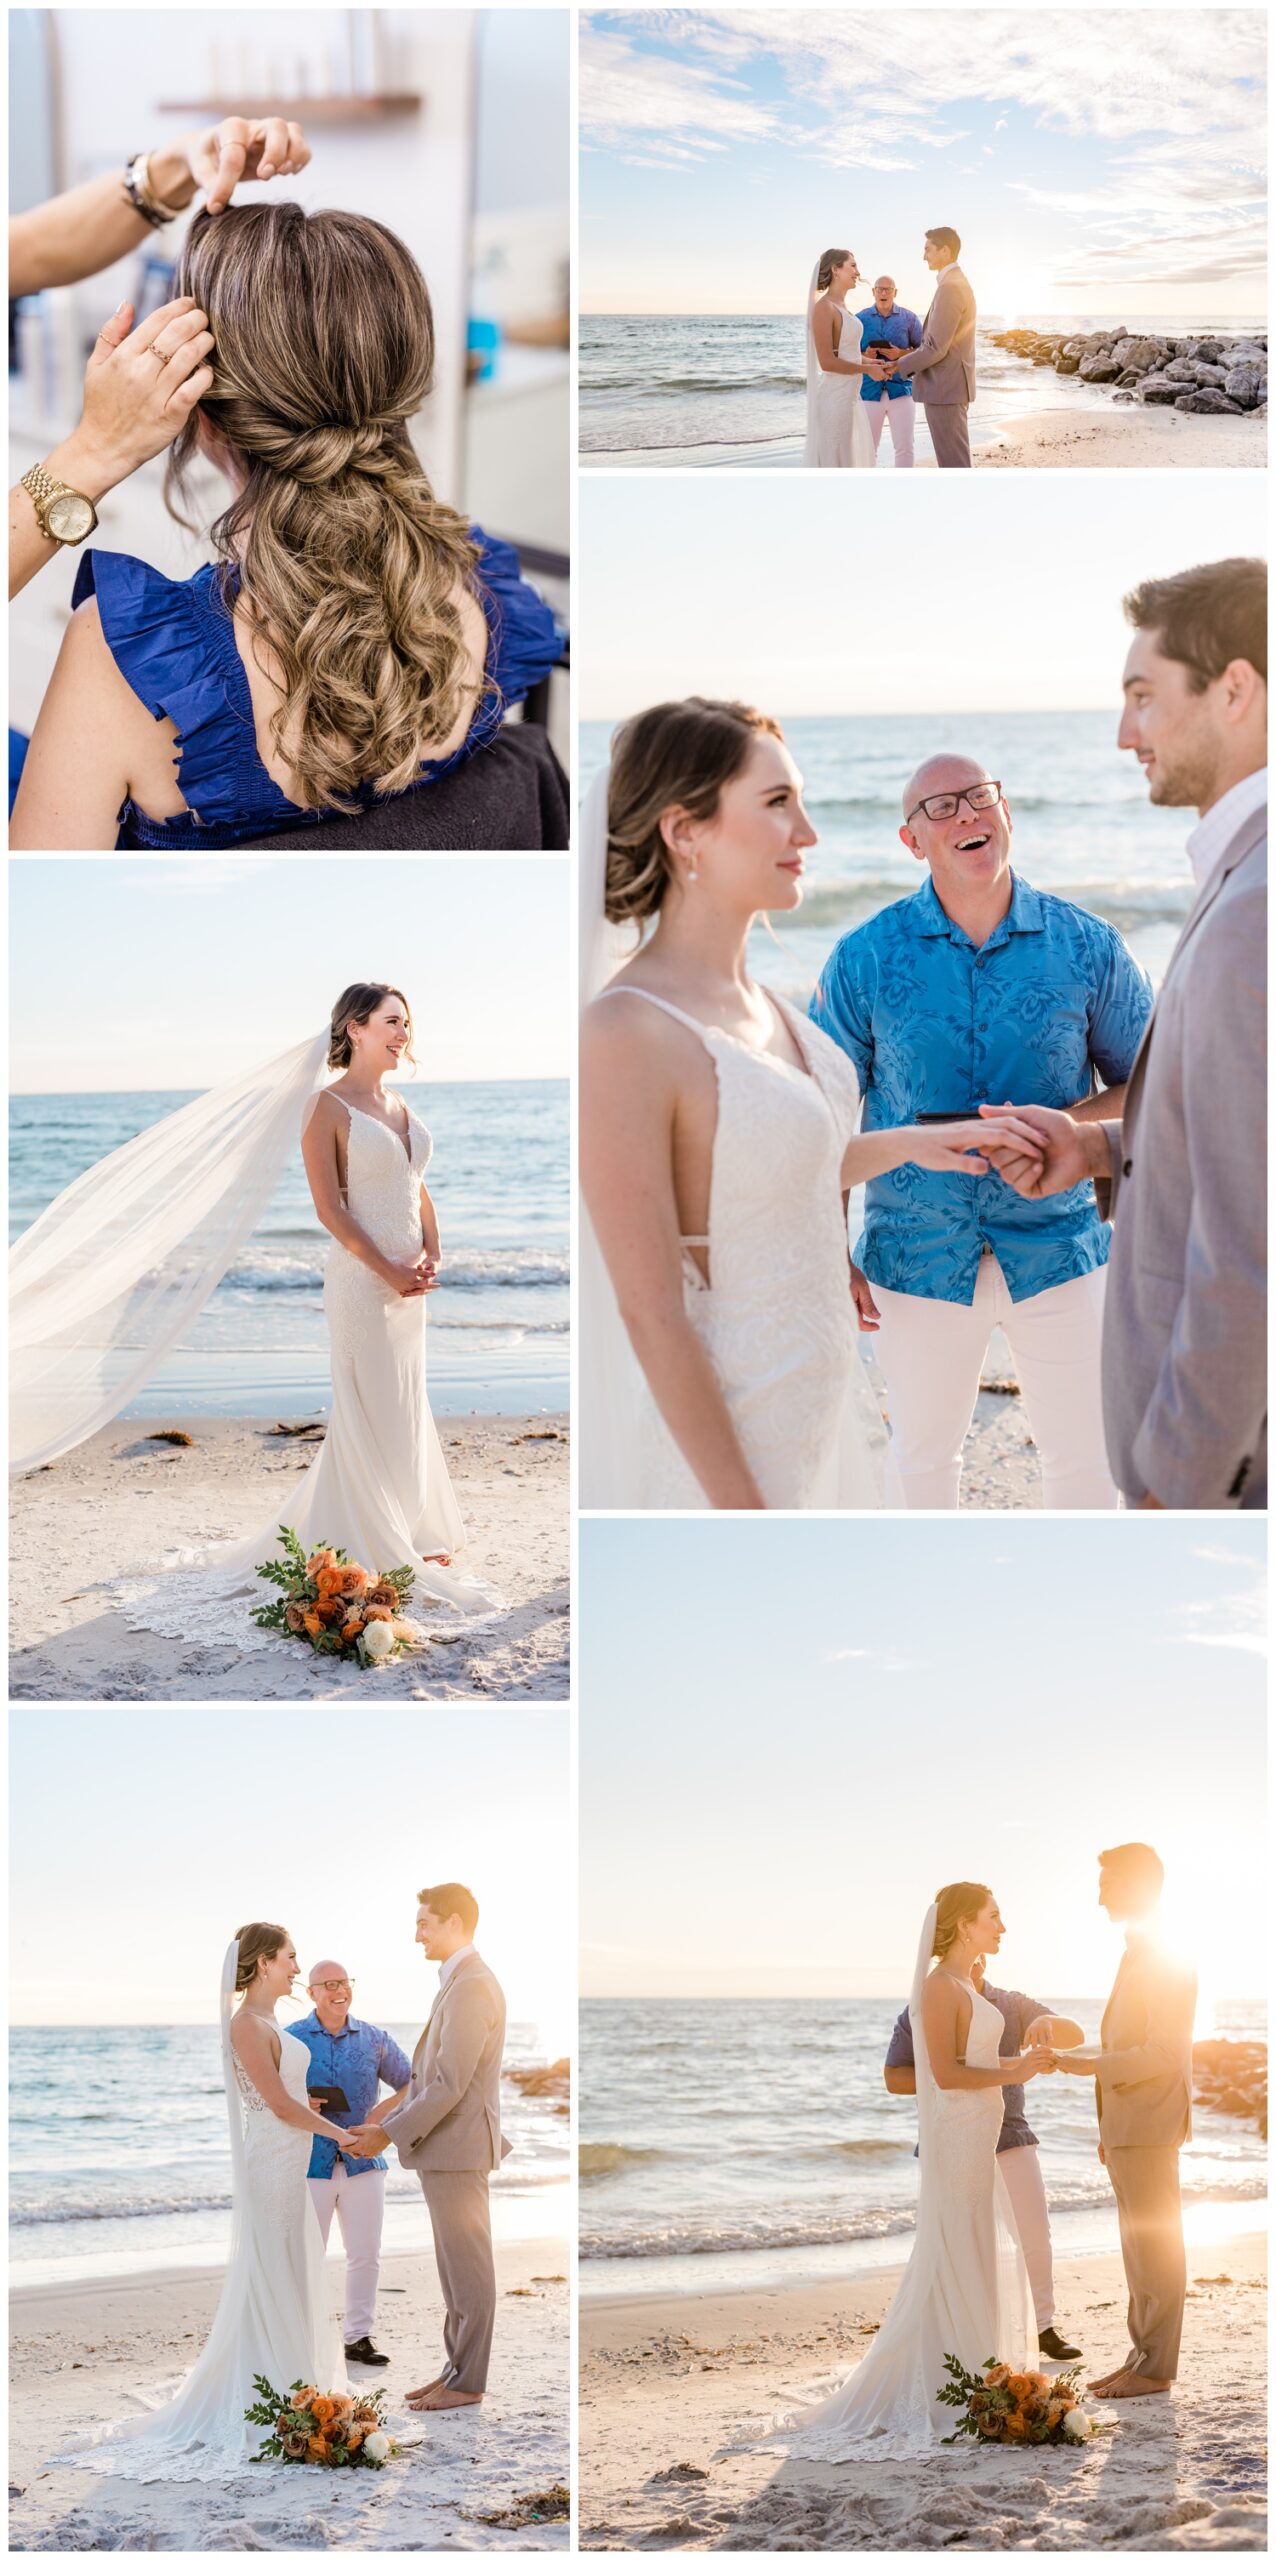 Elopement at Sunset Beach, reverend scott lortz, apt b photography, lasting luxe artistry, arms of persephone florals